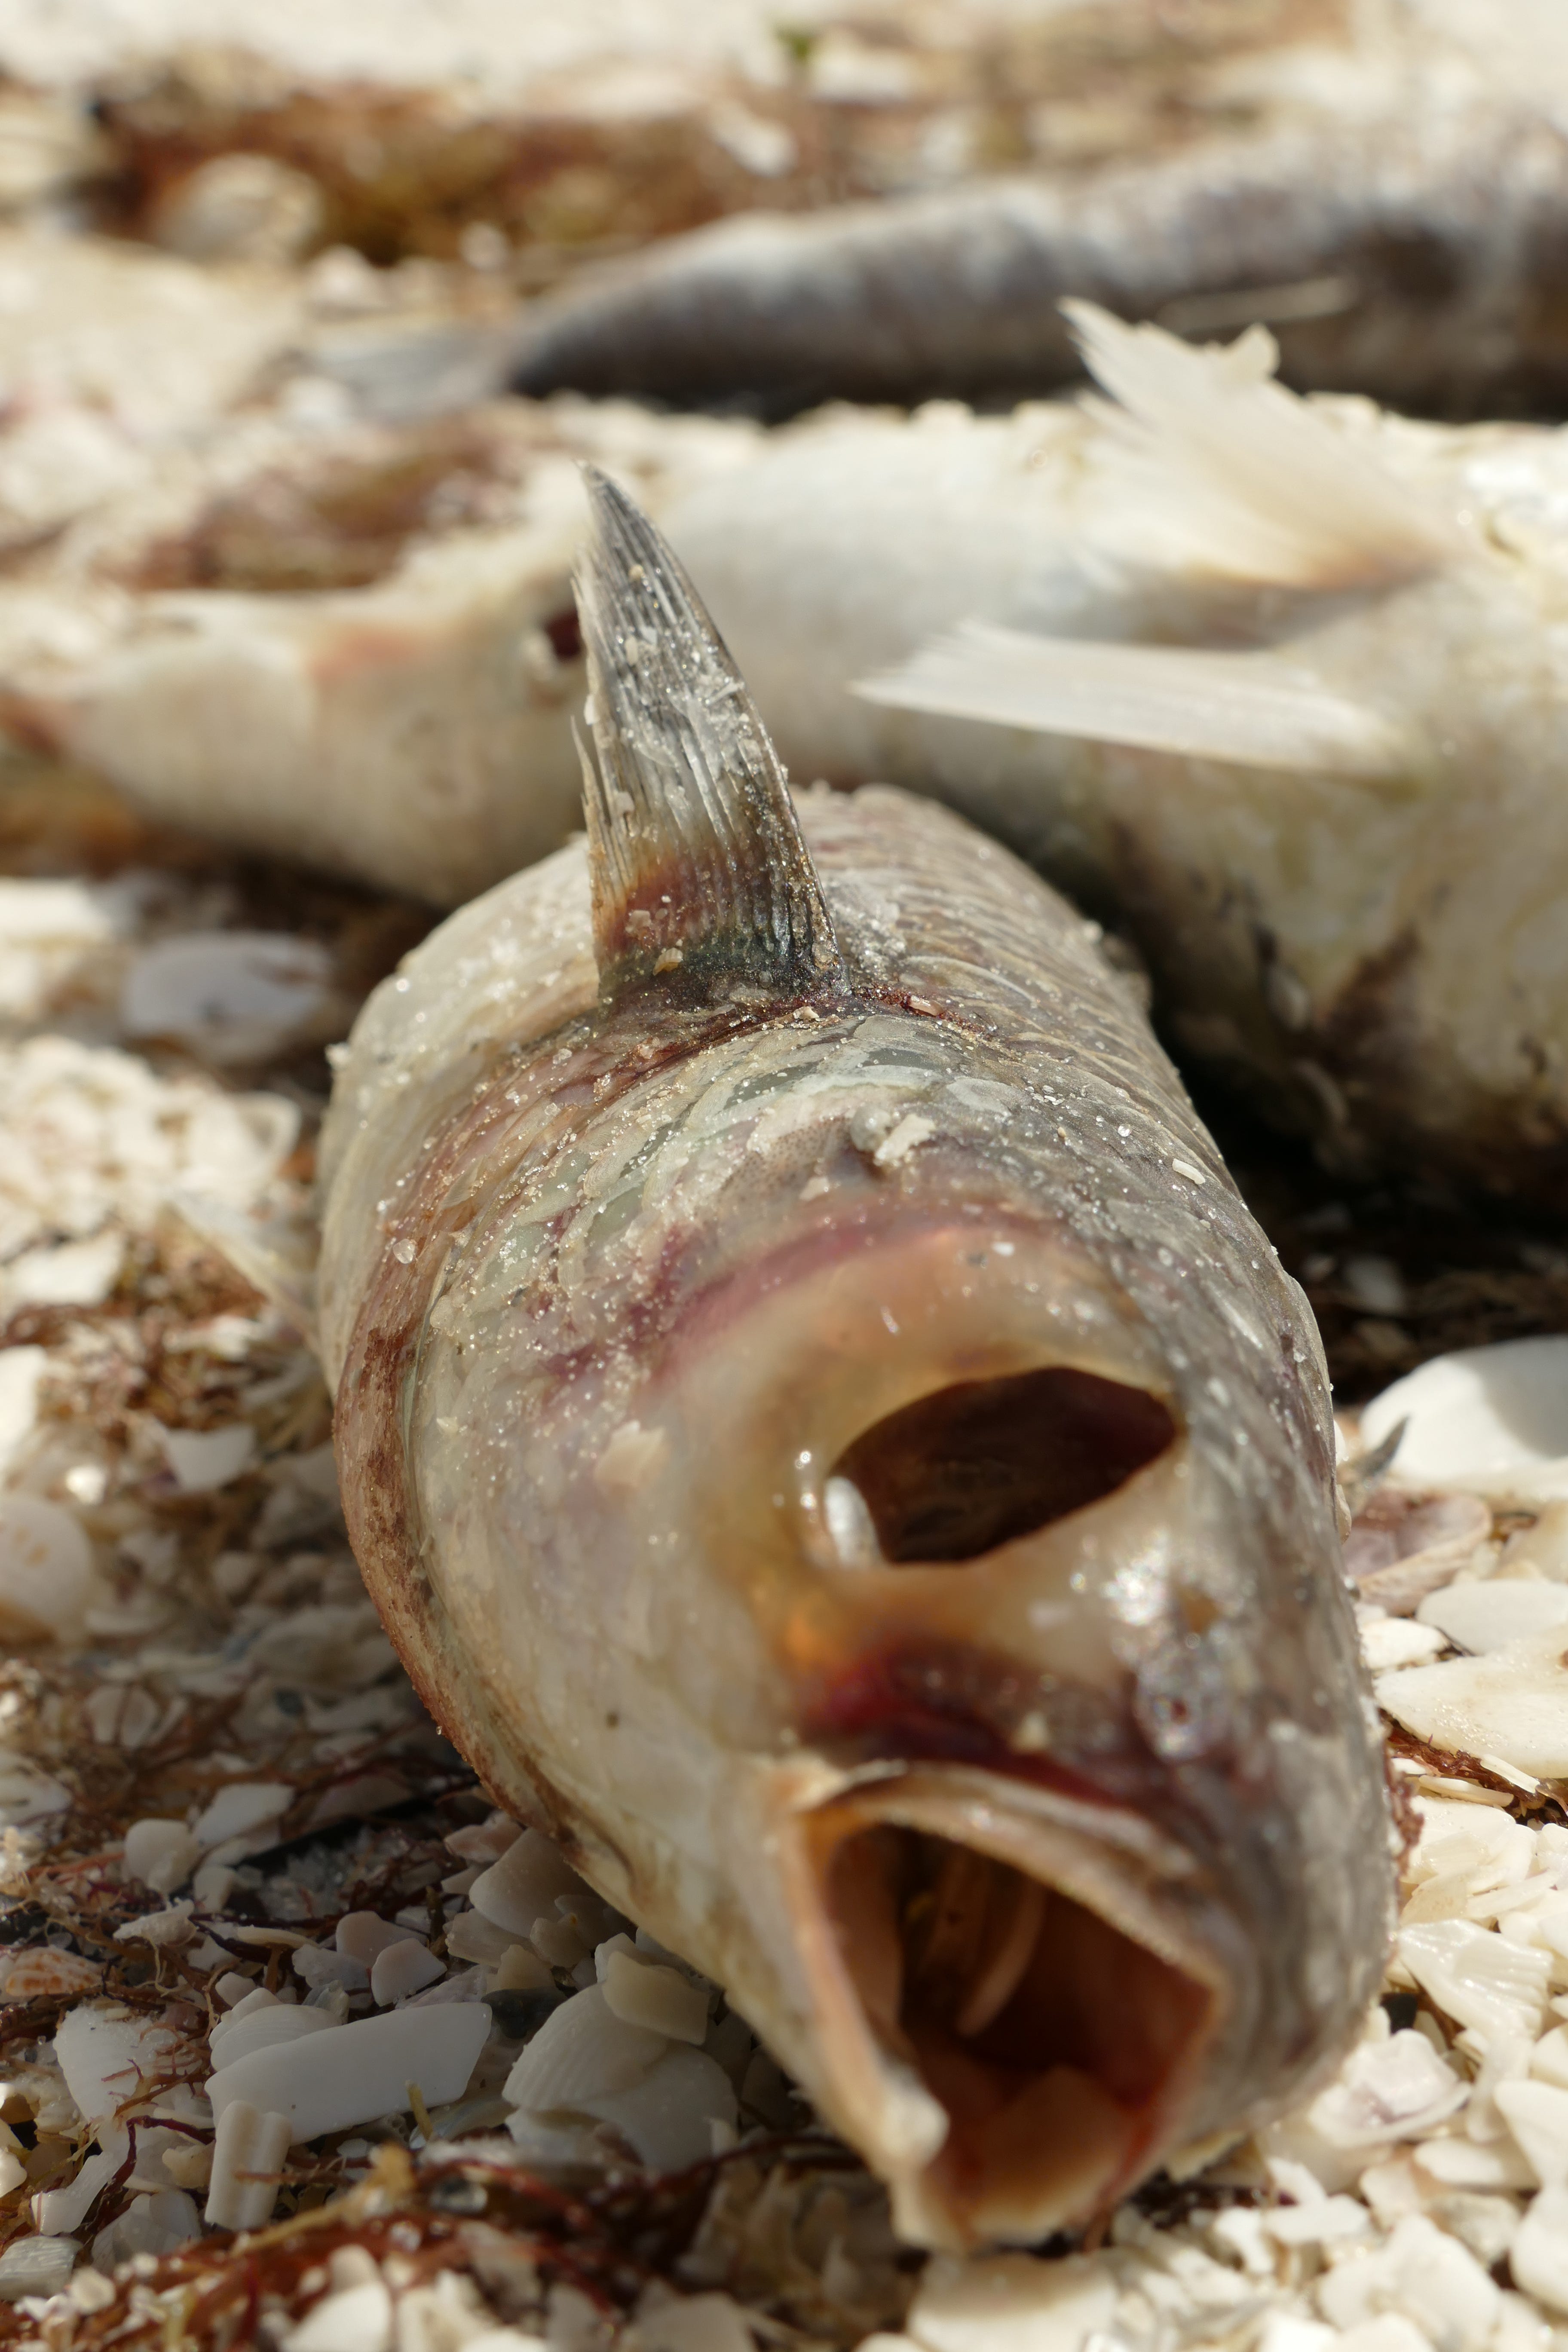 Dozens of dead fish washed ashore Oct. 9 on Marco Island as government agencies alerted of high levels of the organism that causes the red tide.